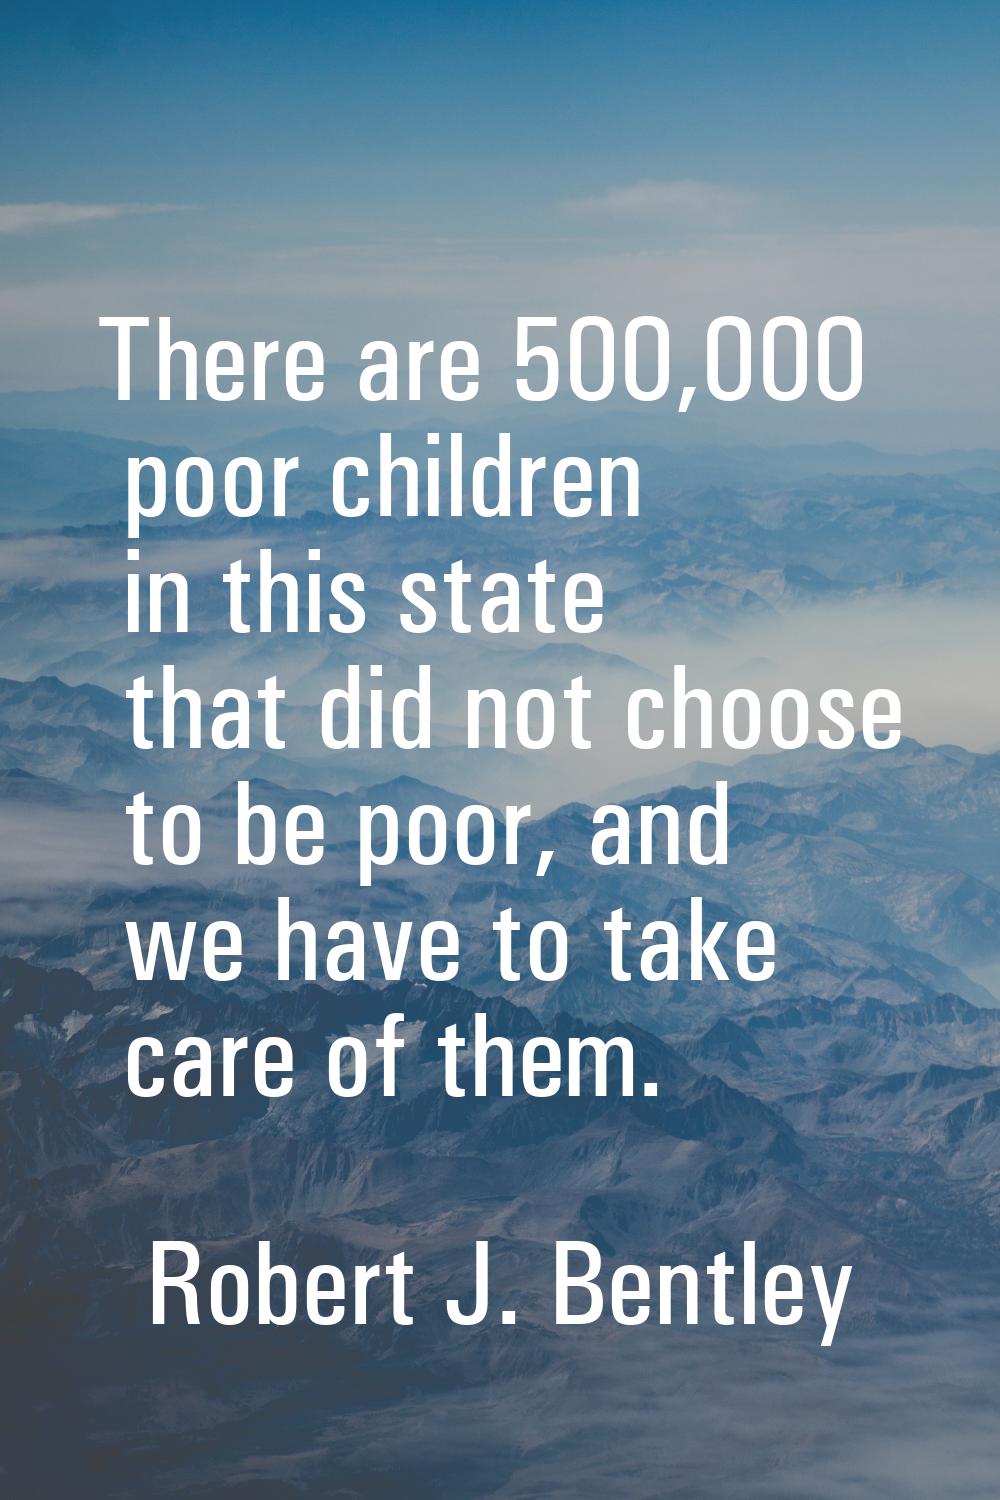 There are 500,000 poor children in this state that did not choose to be poor, and we have to take c